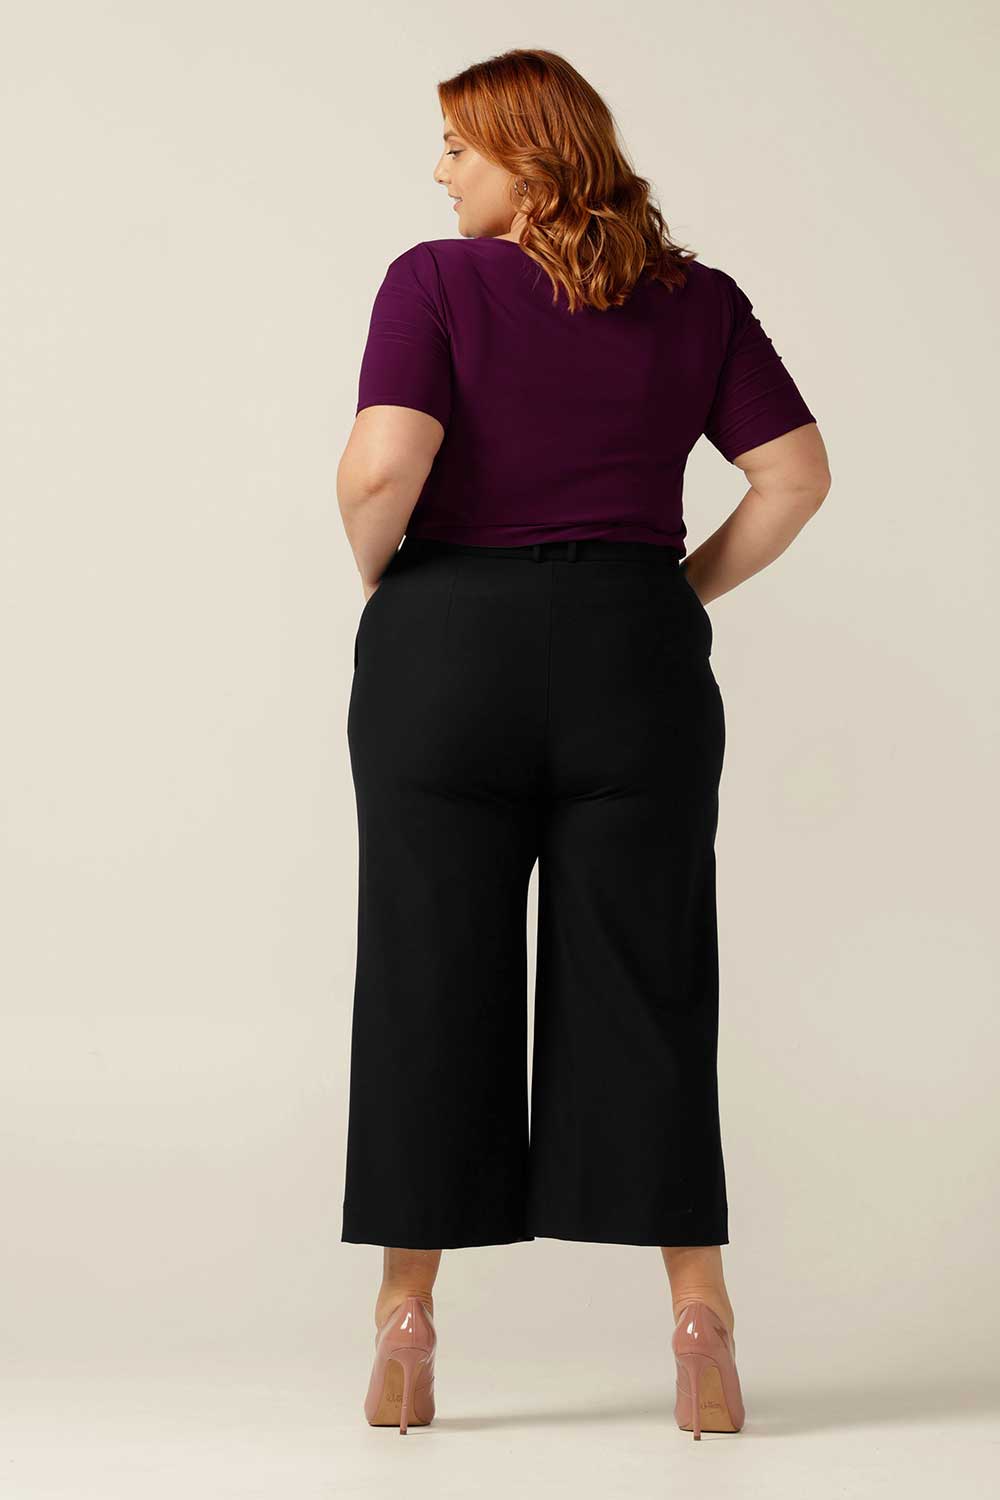 Size 18 curvy woman wearing tailored wide leg, cropped-length, black work trousers. The black pants are worn with a boat-neck short sleeve jersey top, both made in Australia, for a complete work wear look.